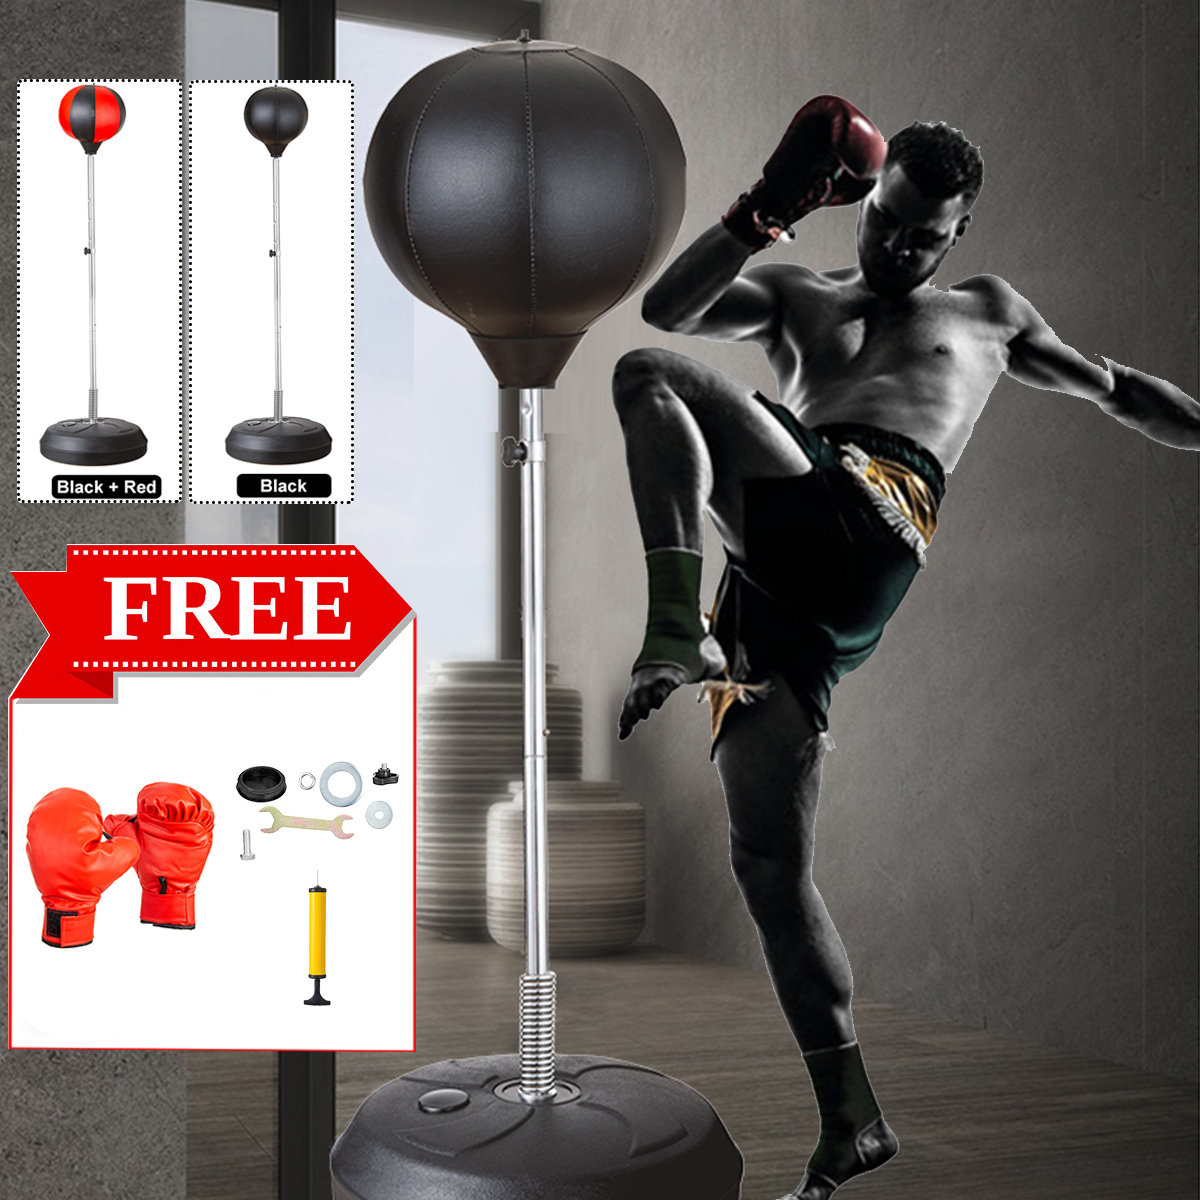 Details about   47.24-59.05inch Boxing Target Adjustable Speed Ball Bag Sport Fitness Training 